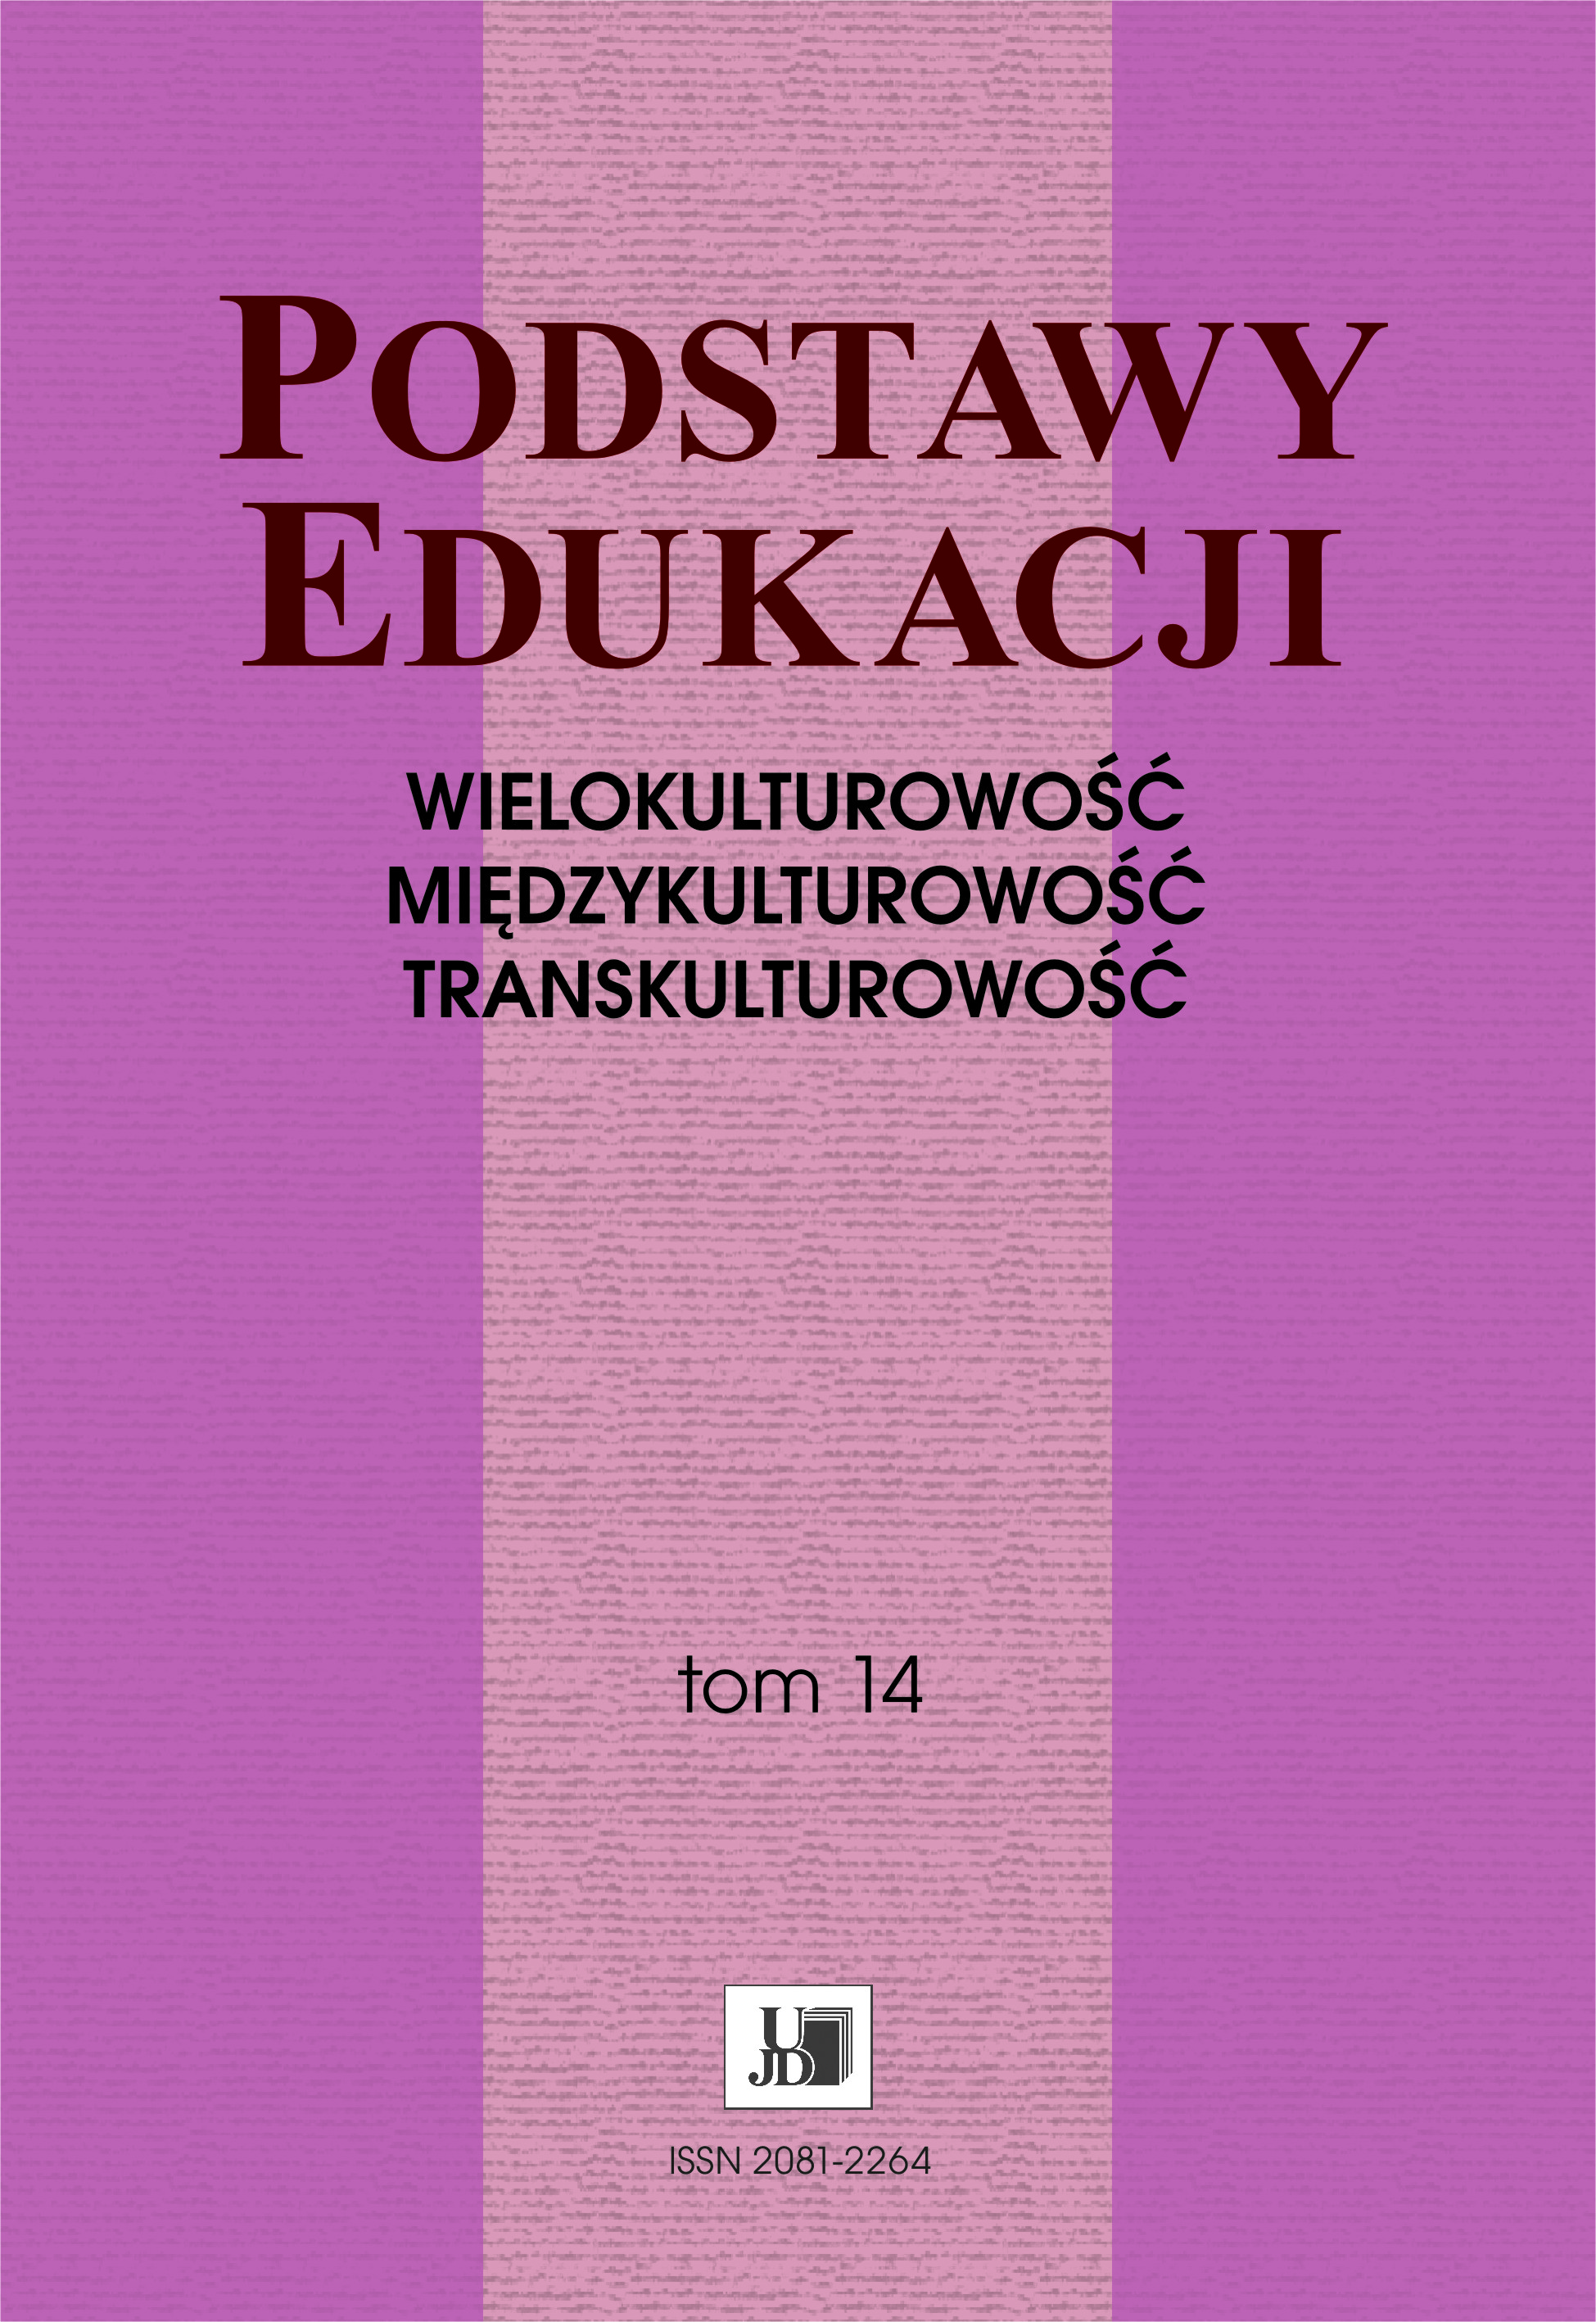 Implementation of intercultural aspects into the curriculum of Polish sign language as a foreign language as exemplified by the MOOC Cover Image